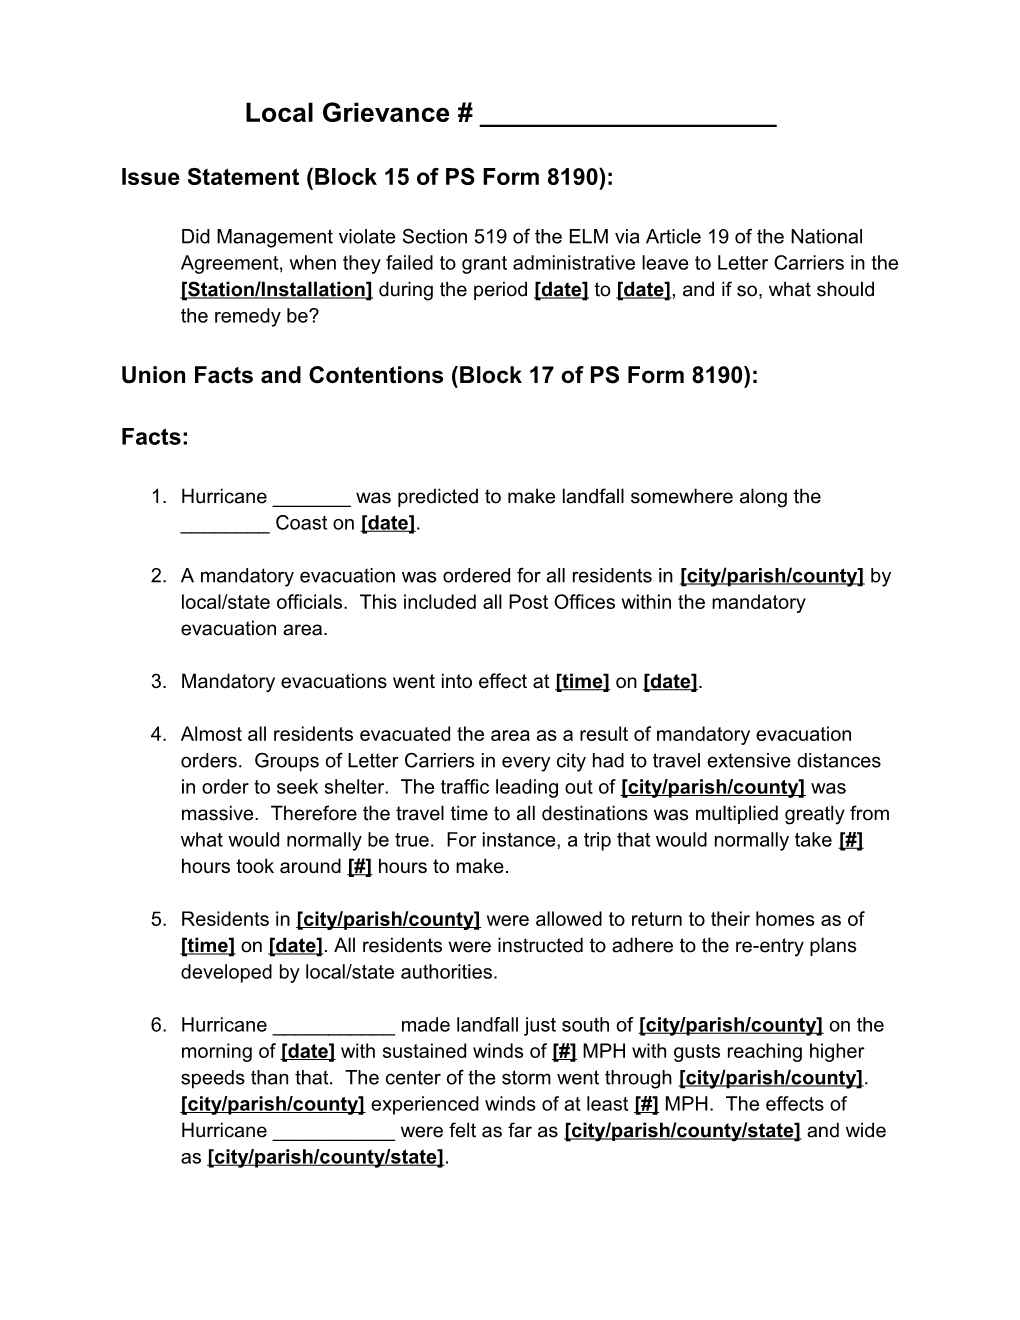 BLOCK 17 Union Facts and Contentions